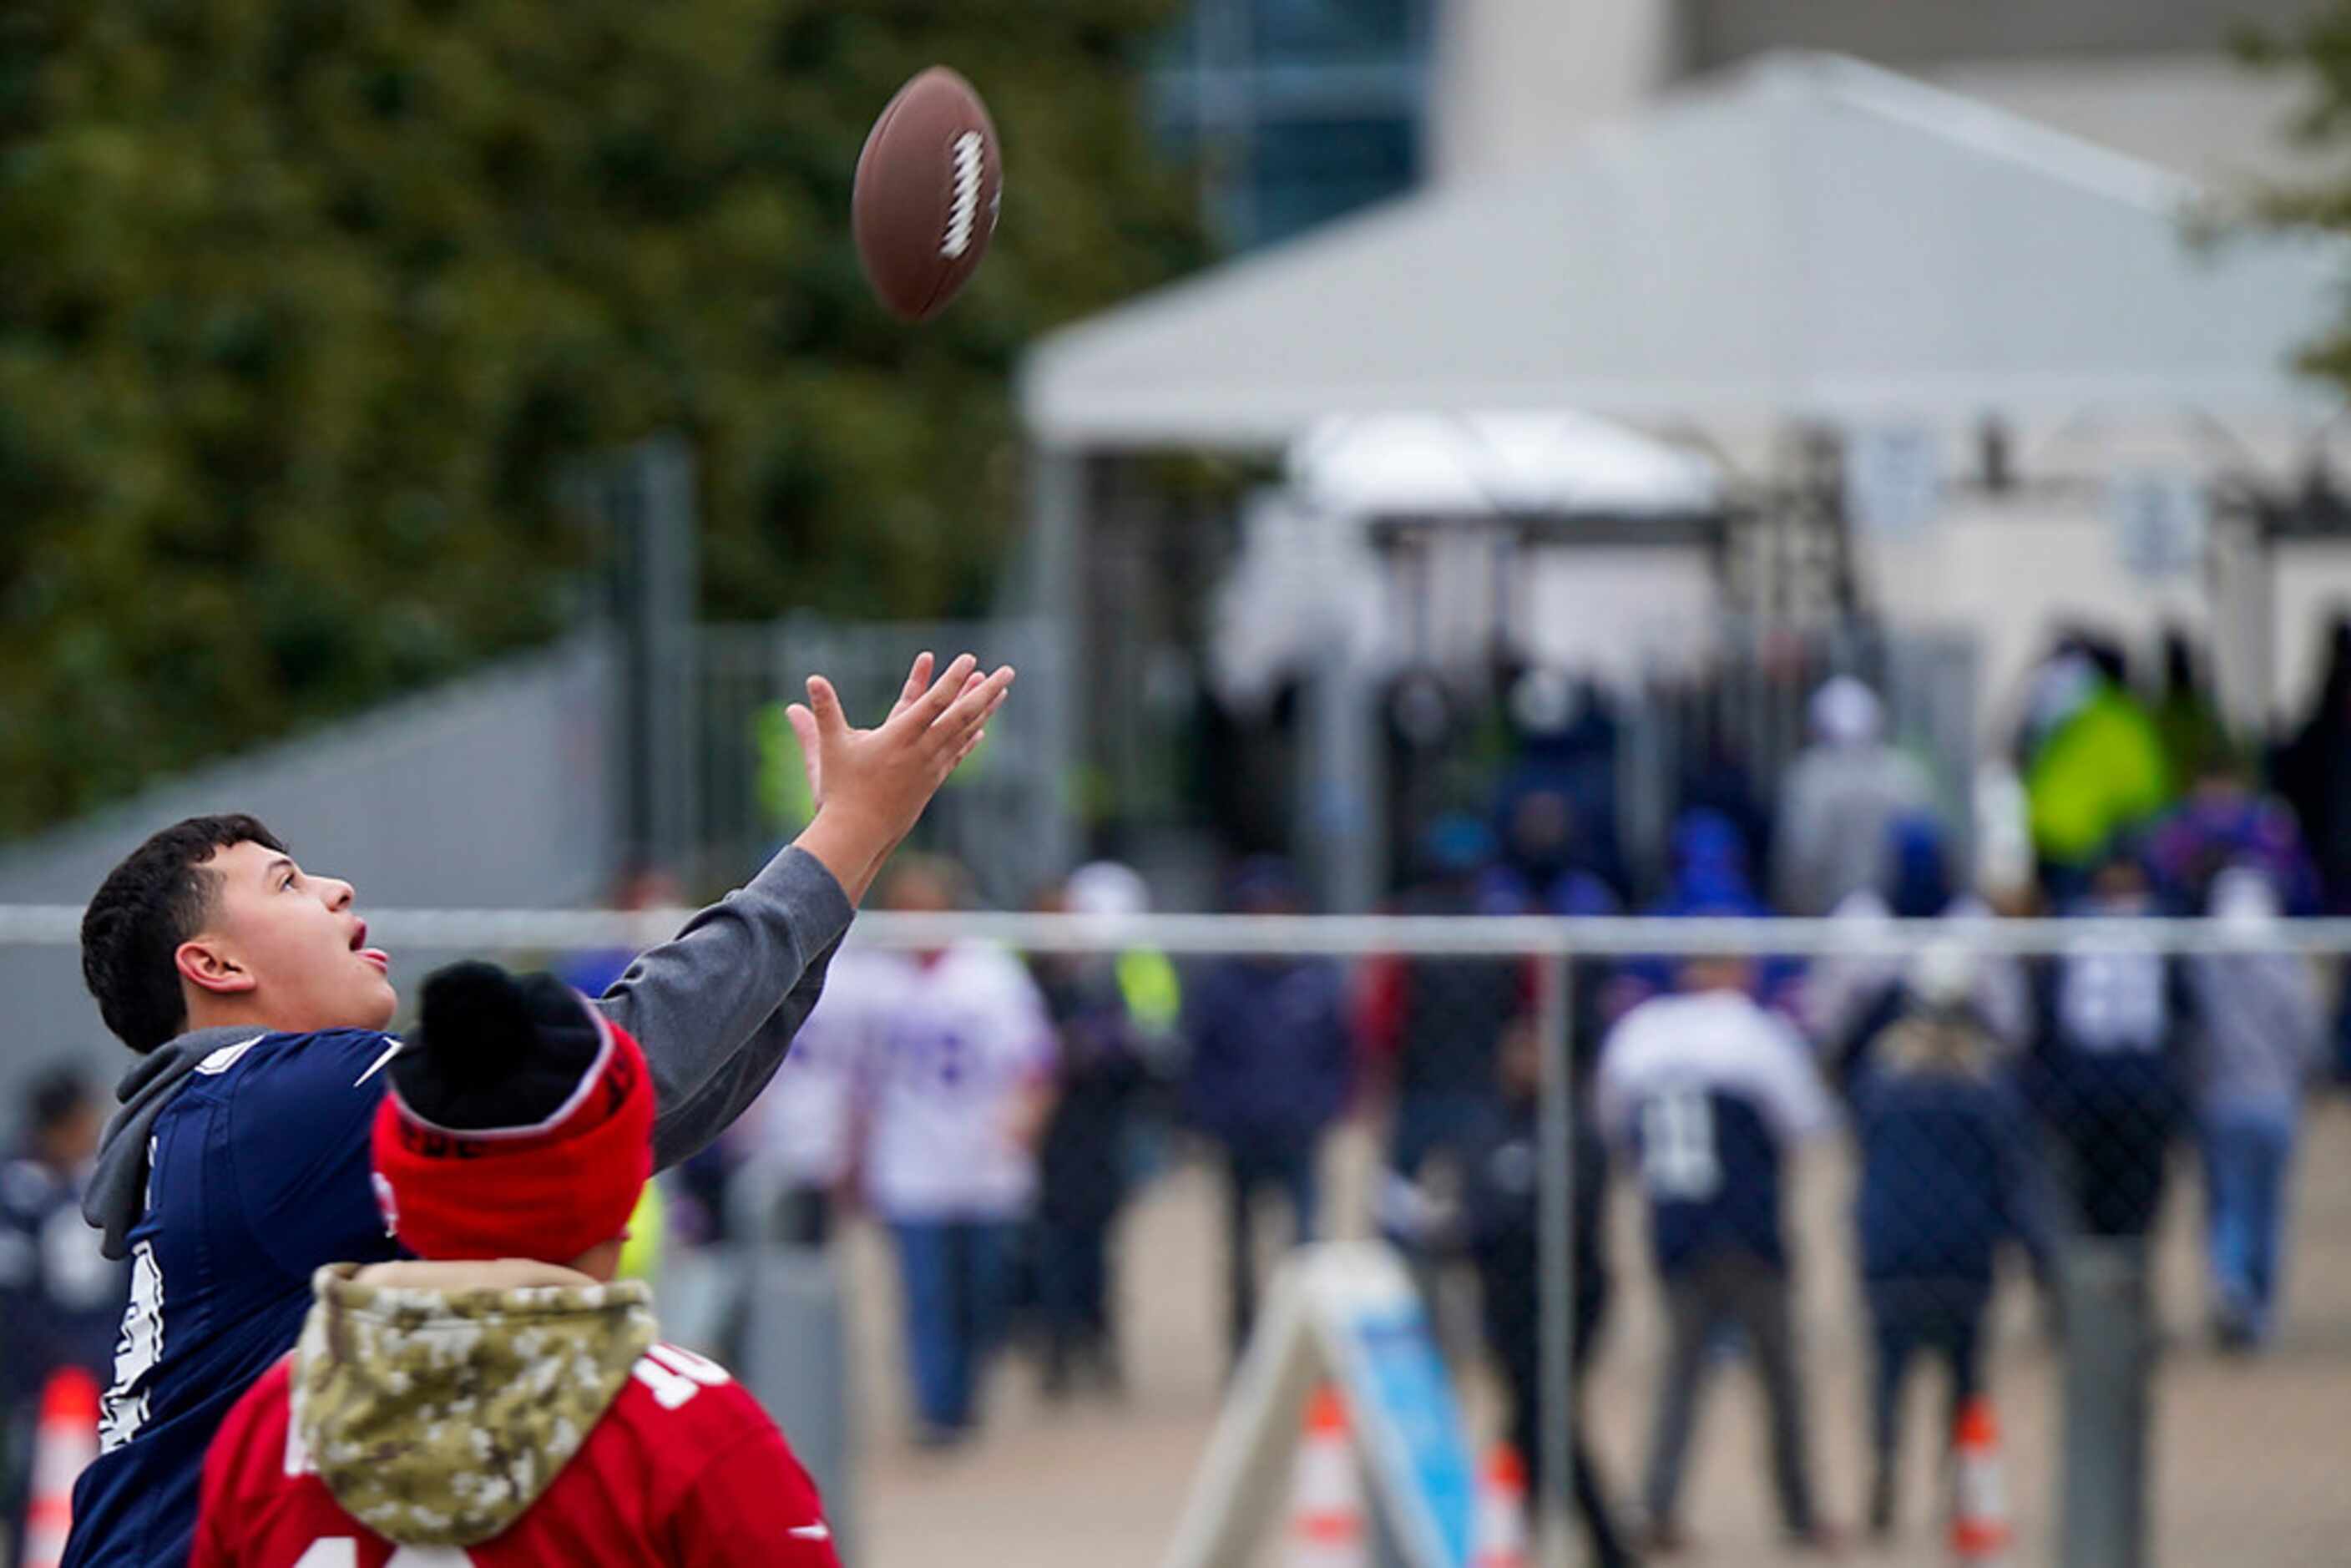 Fans toss a football in the parking lot as they tailgate before an NFL football game between...